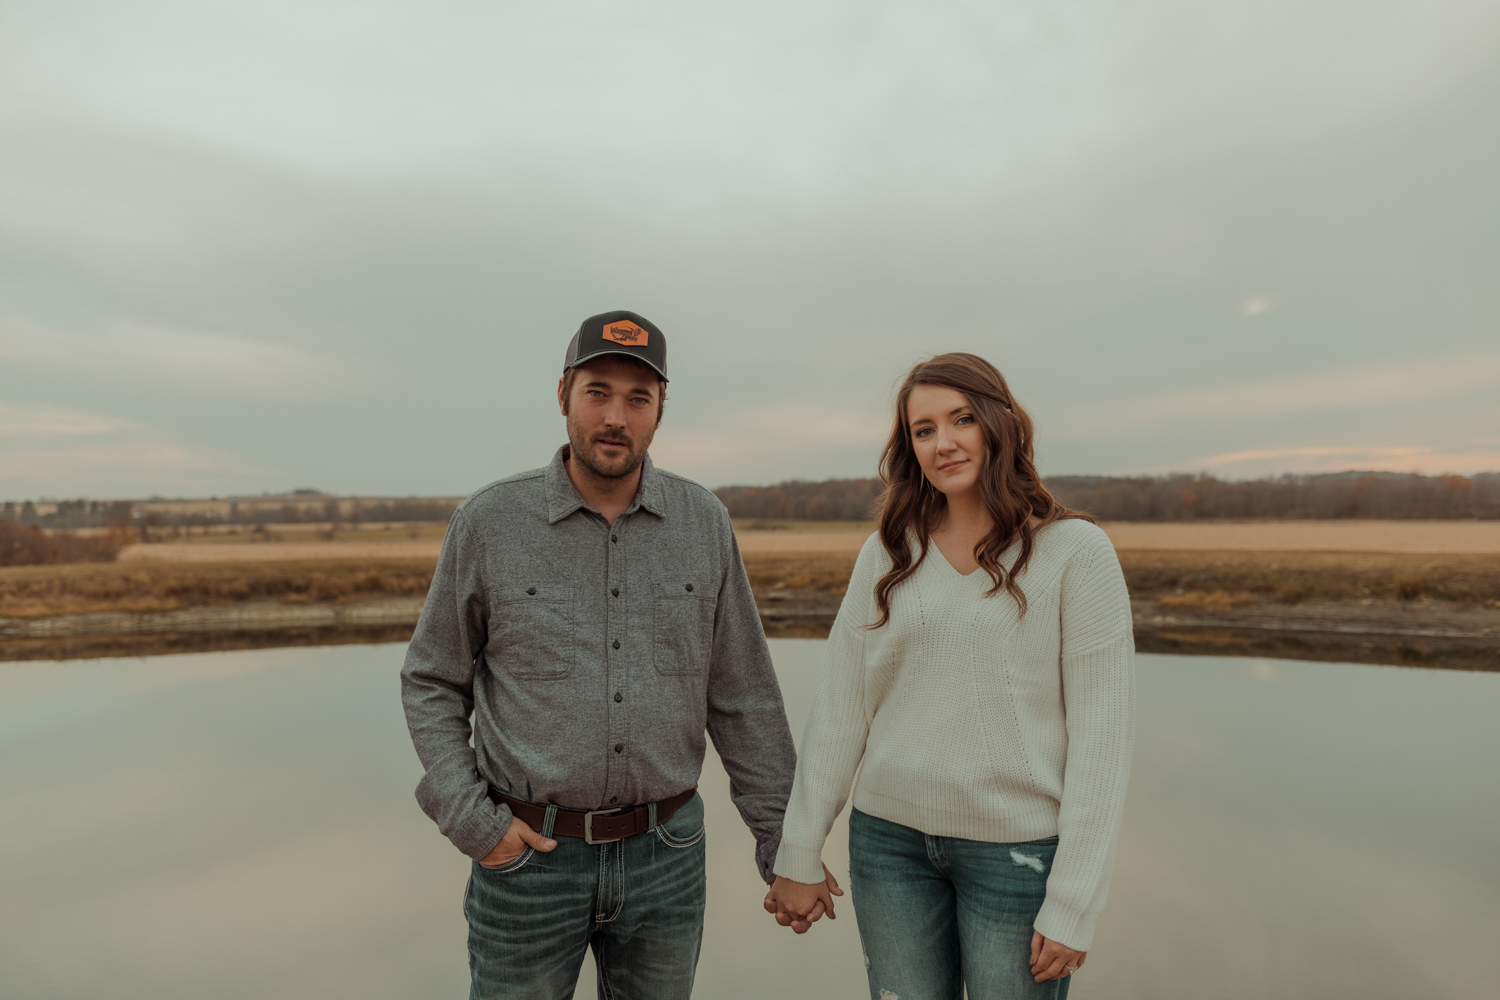 Wildwood Golf Course Engagement Pictures, Charles City, Iowa